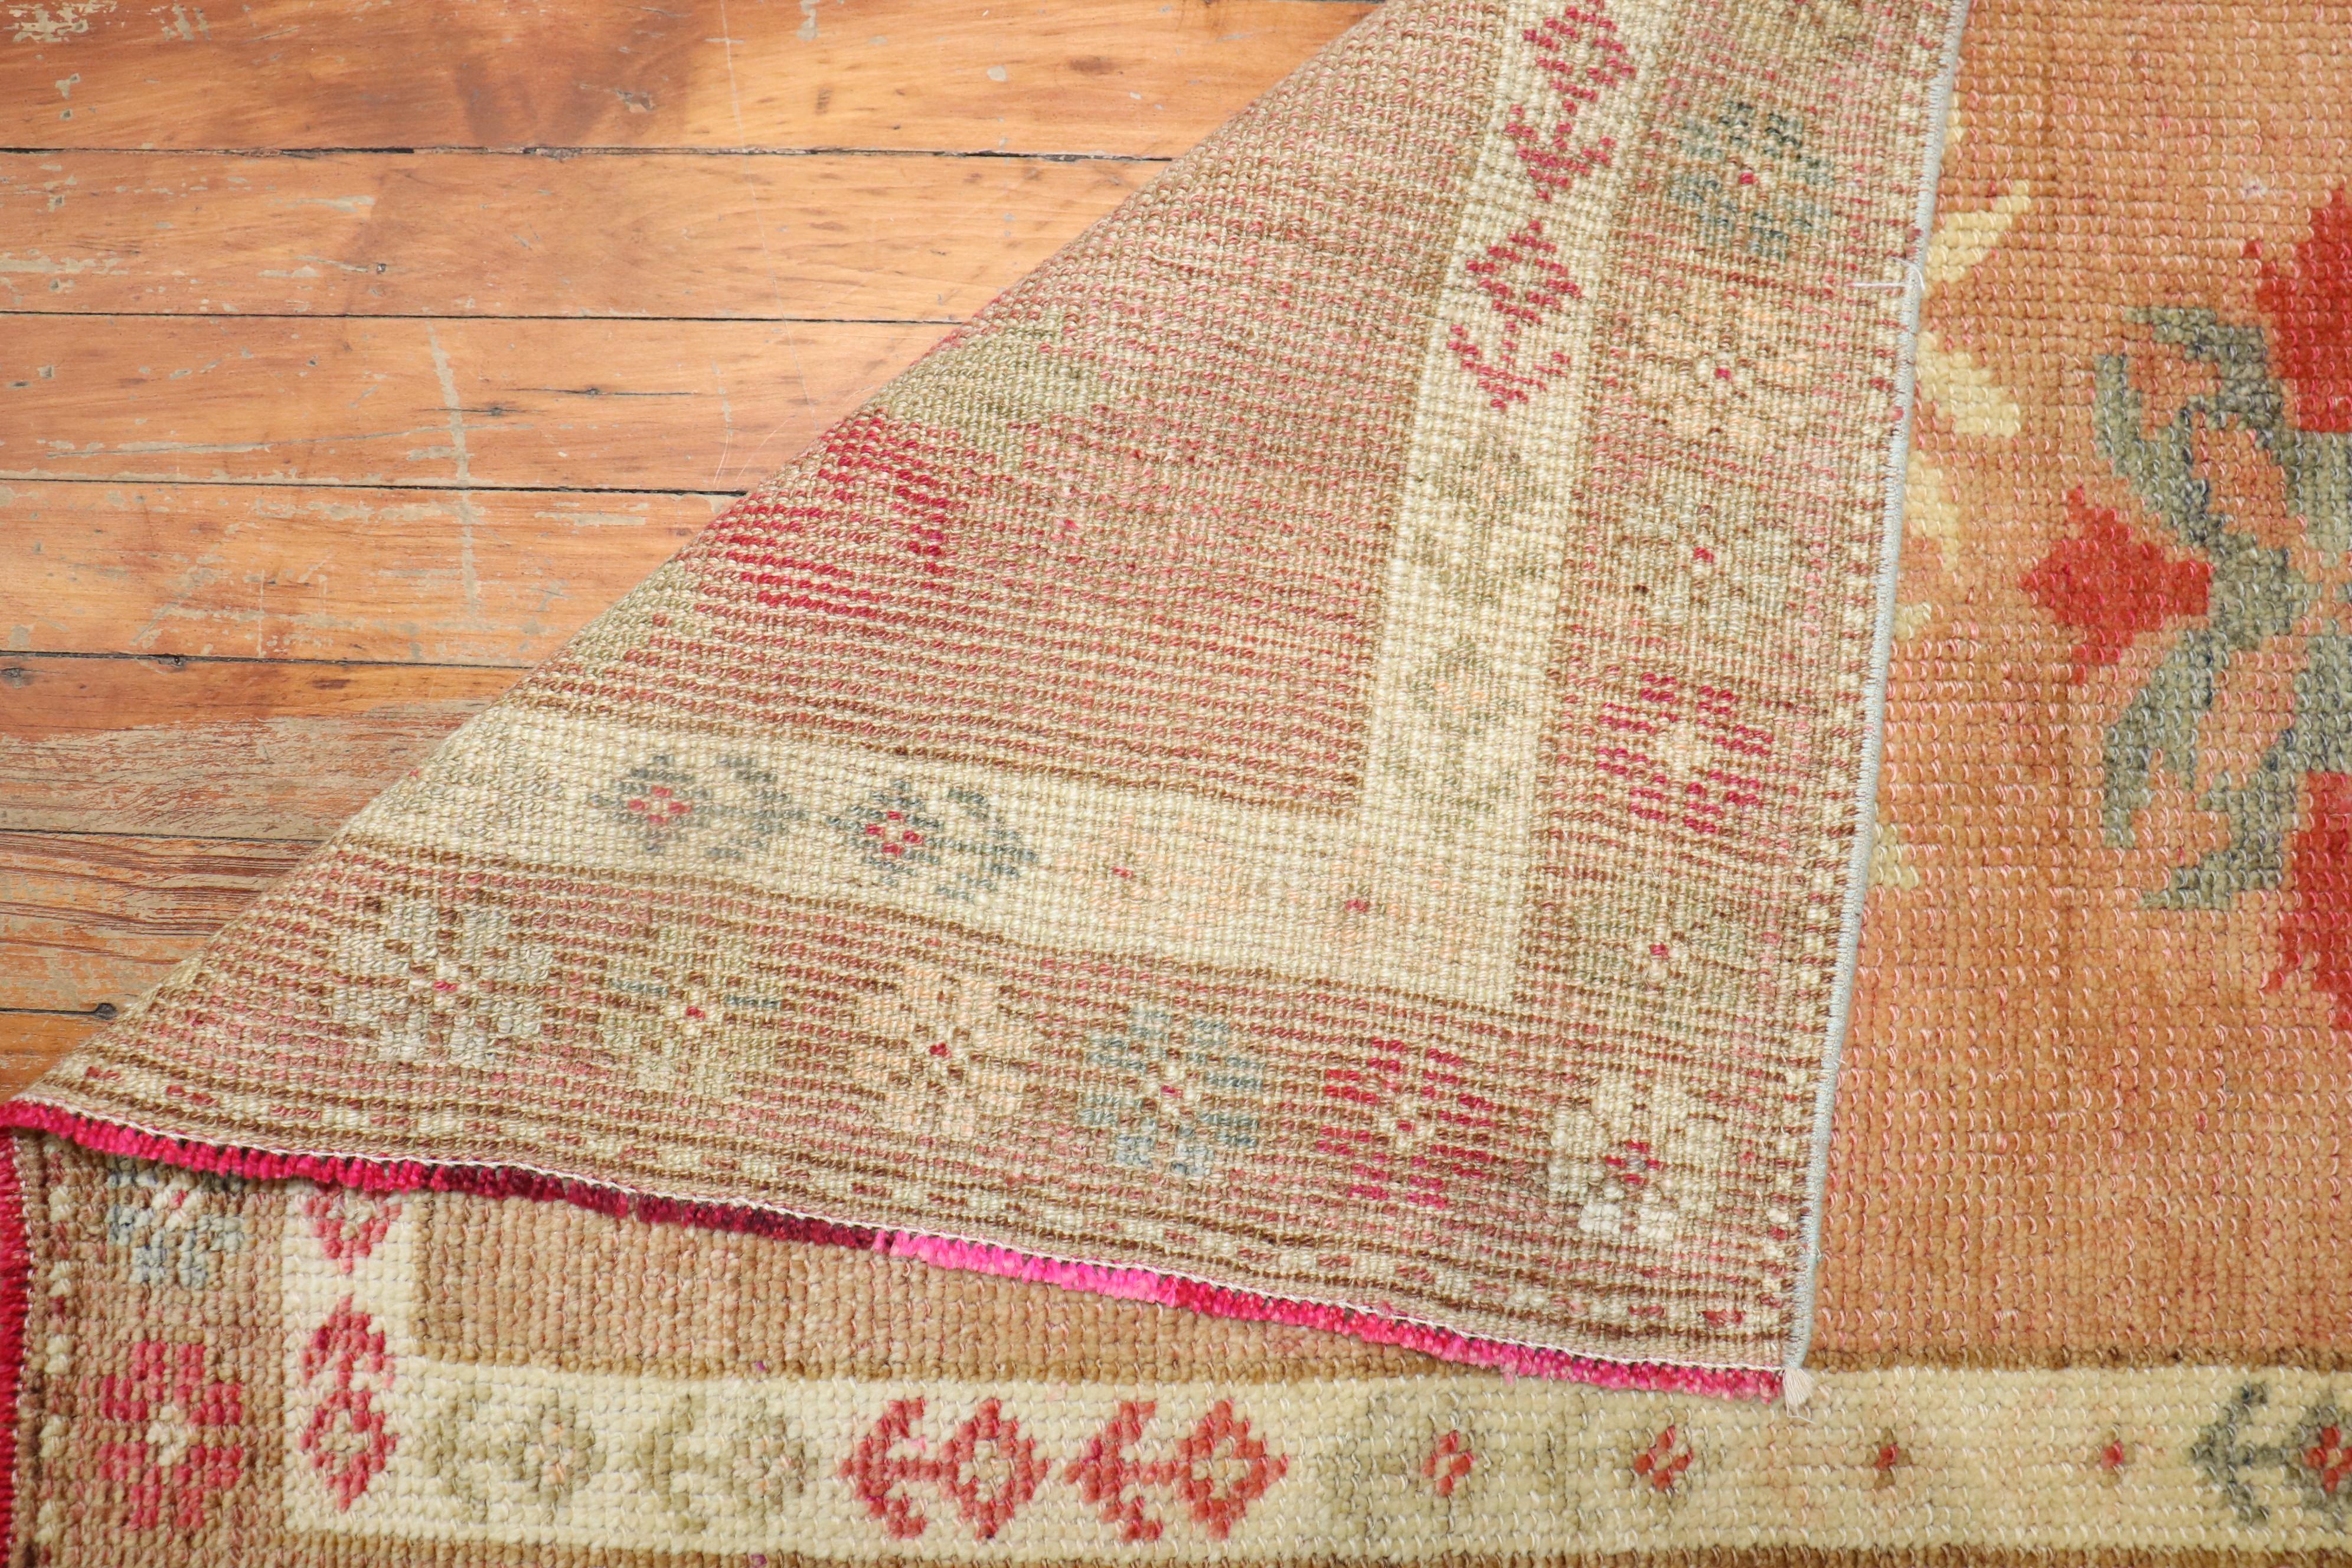 Long and narrow Turkish runner from the middle of the 20th century.

Measures: 2'8'' x 15'11''.